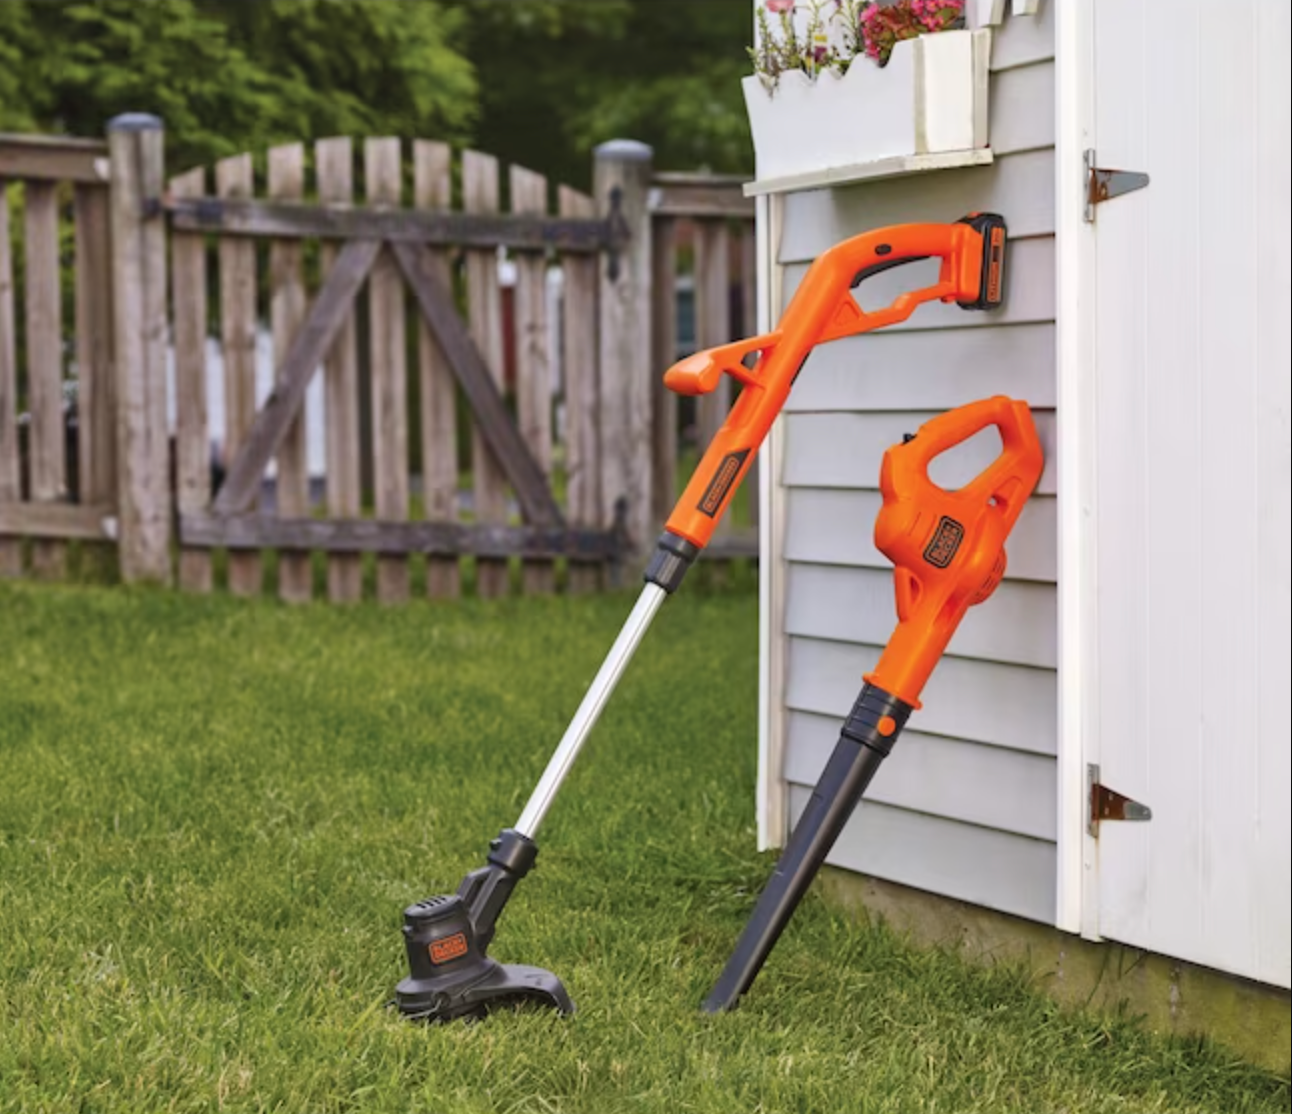 Black+Decker String Trimmer and Blower Combo on Sale at Lowe's SpringFest